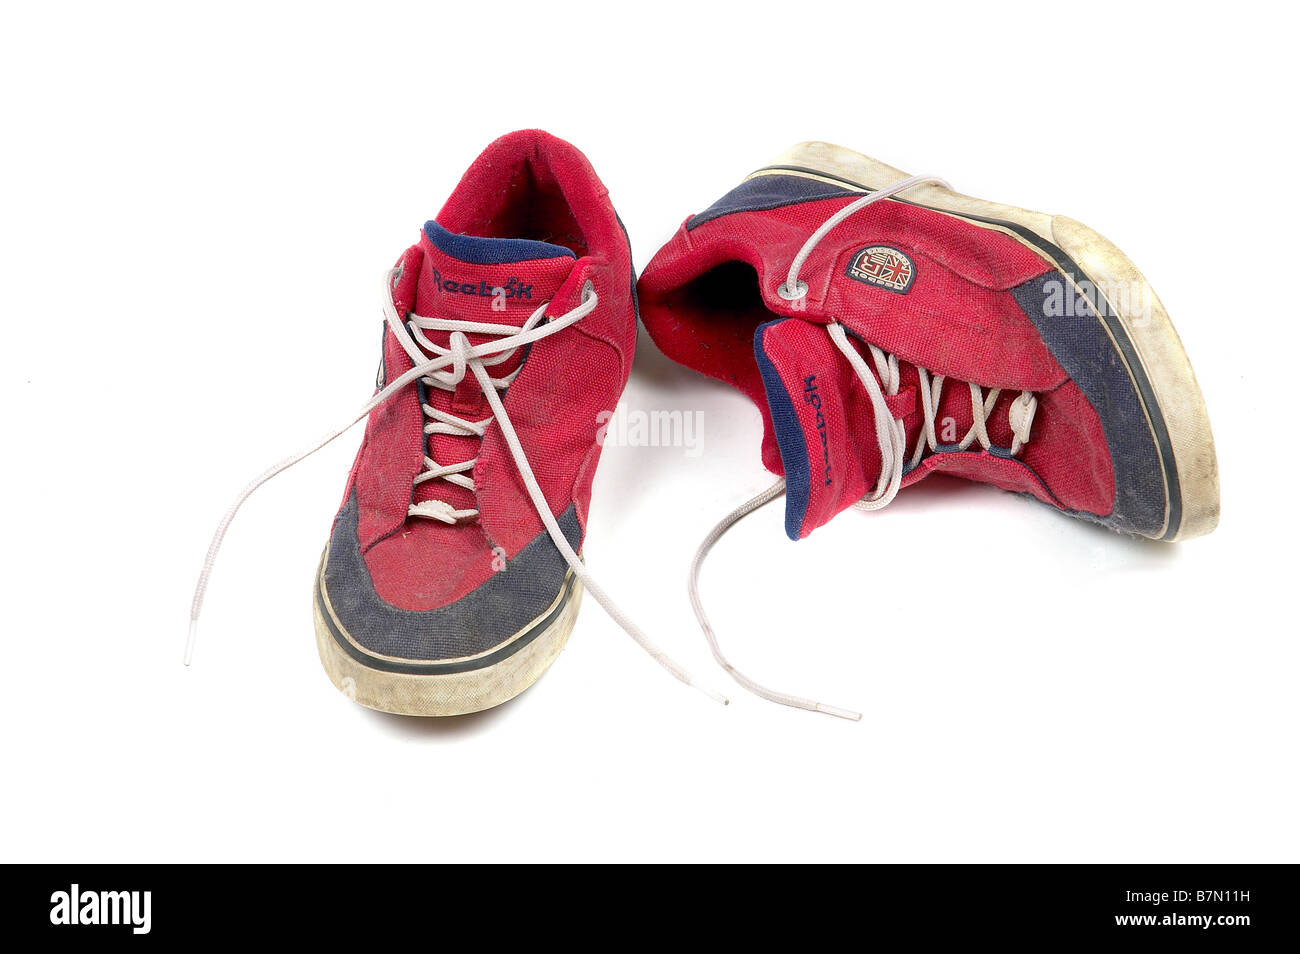 OLD RED RUNNING SHOES Stock Photo